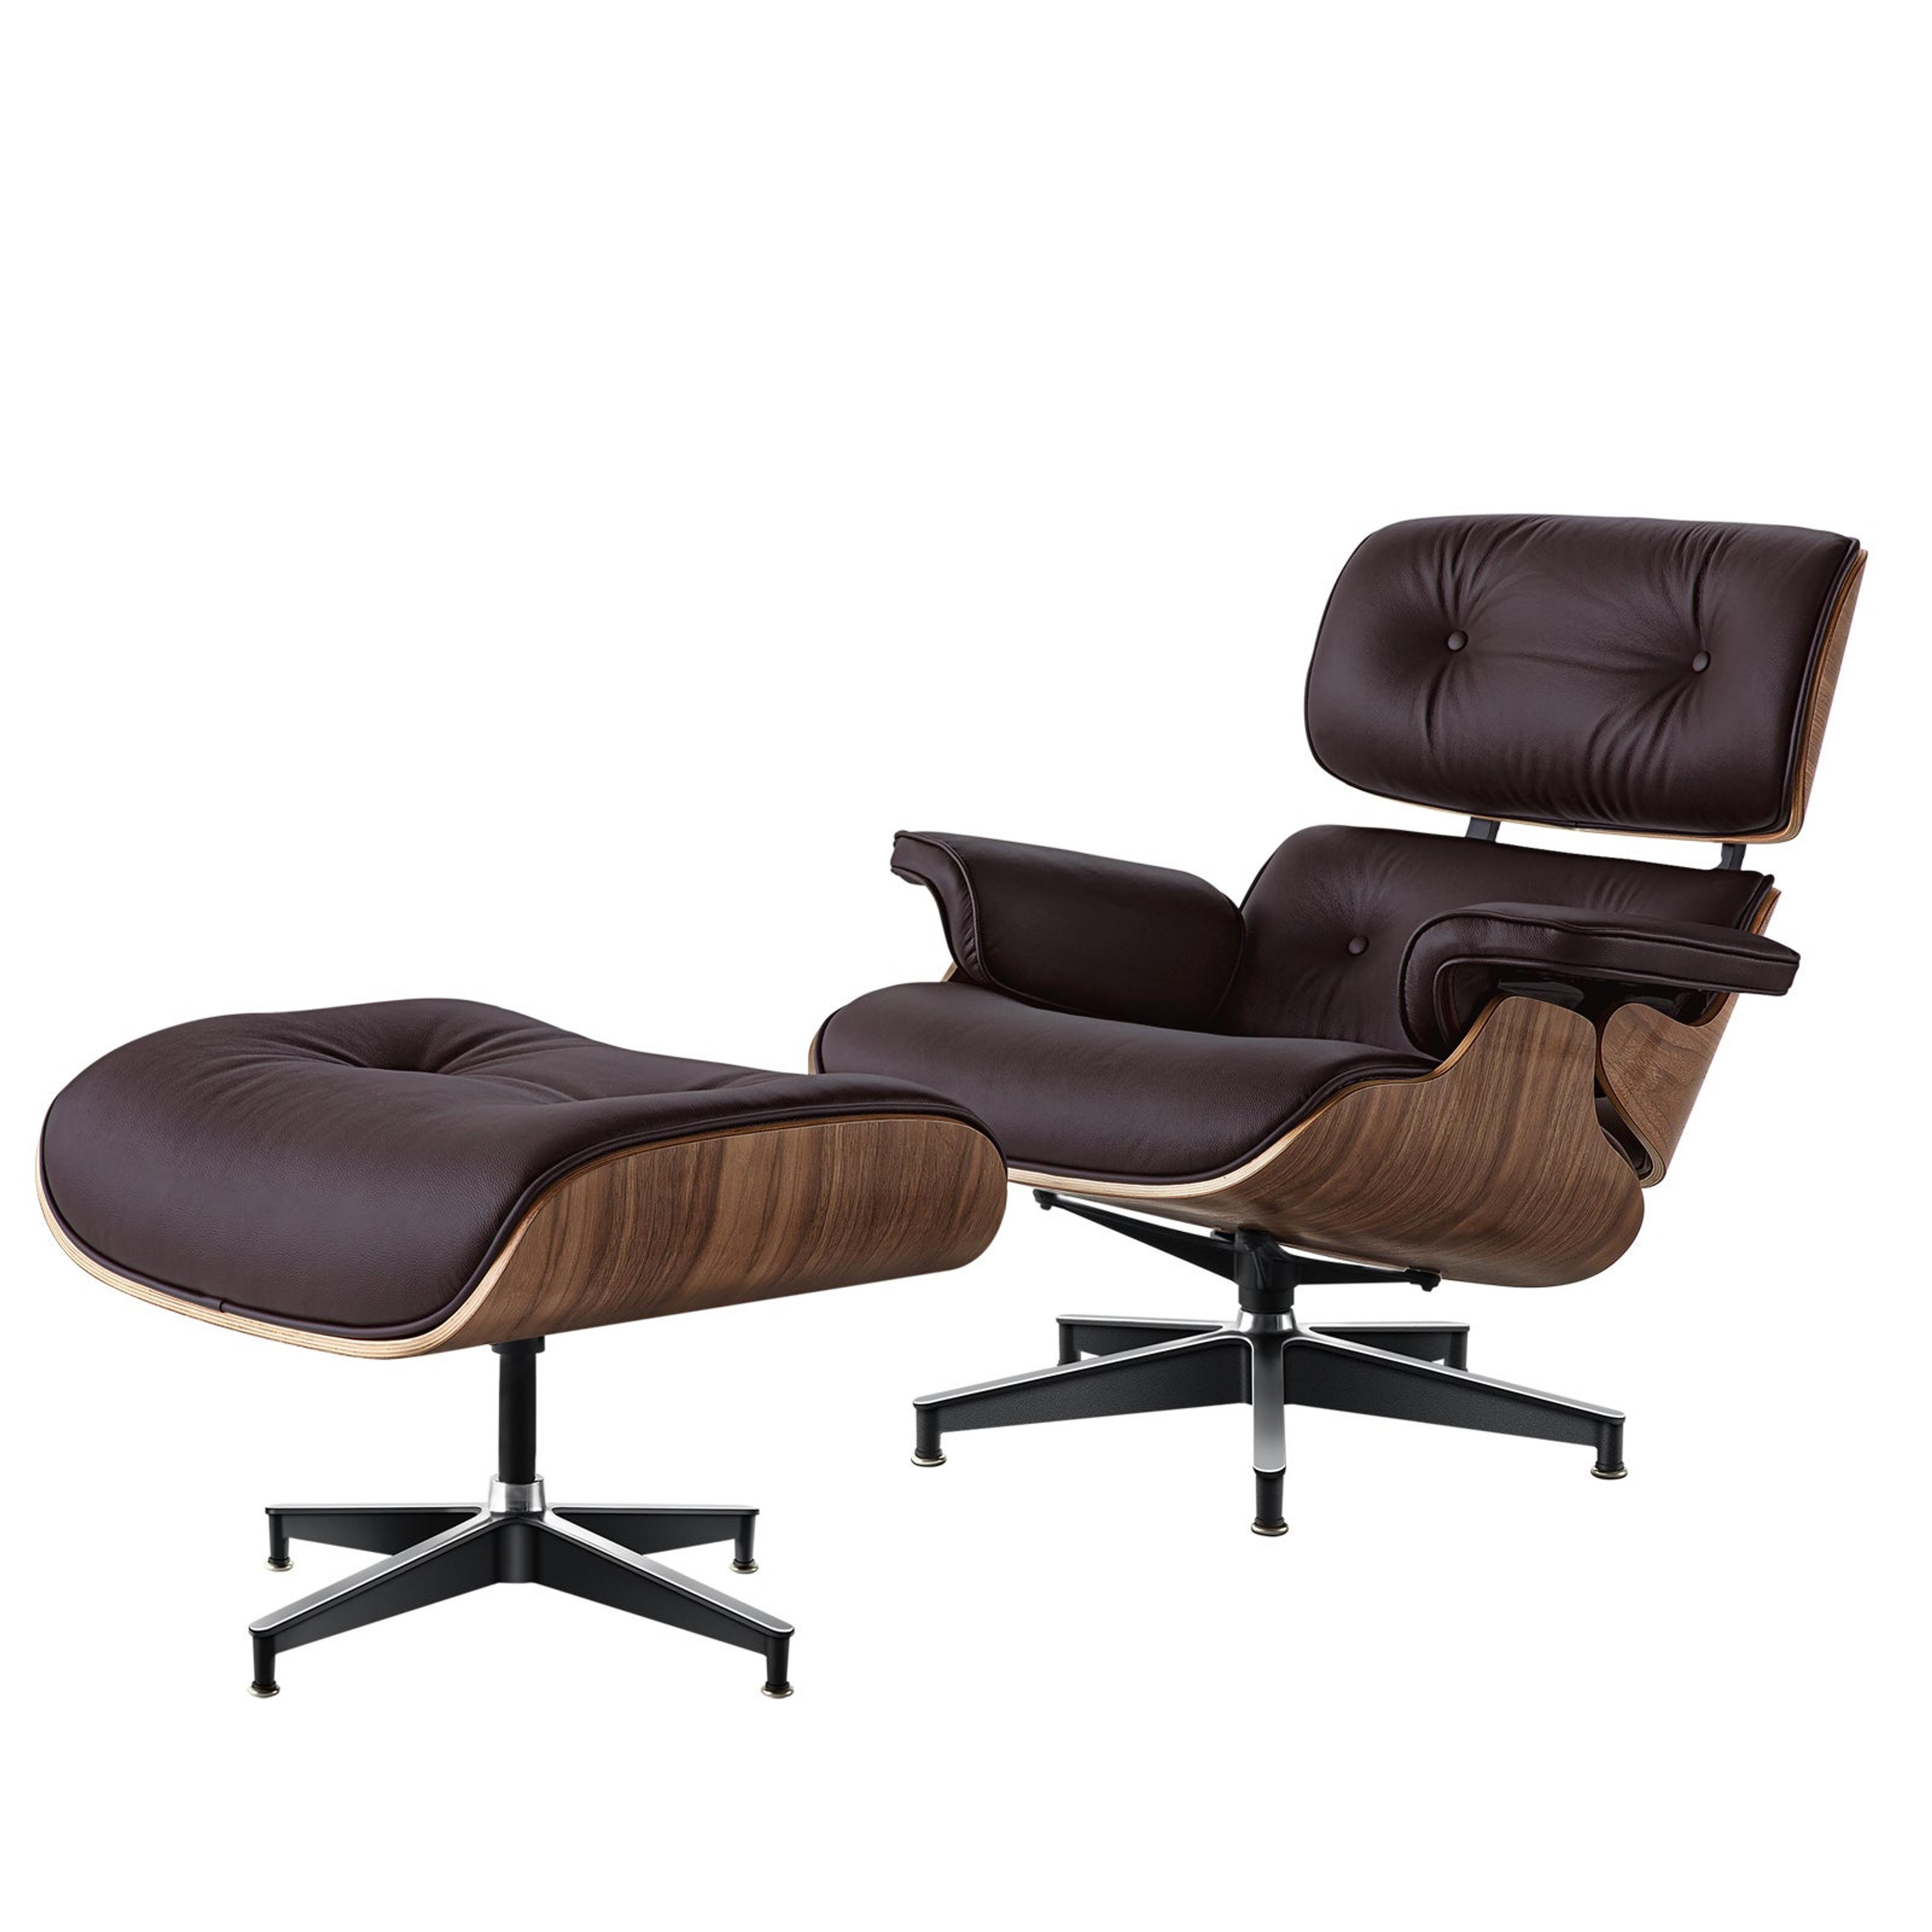 Eames Lounge Chair & Ottoman - Brown Leather, Walnut Wood